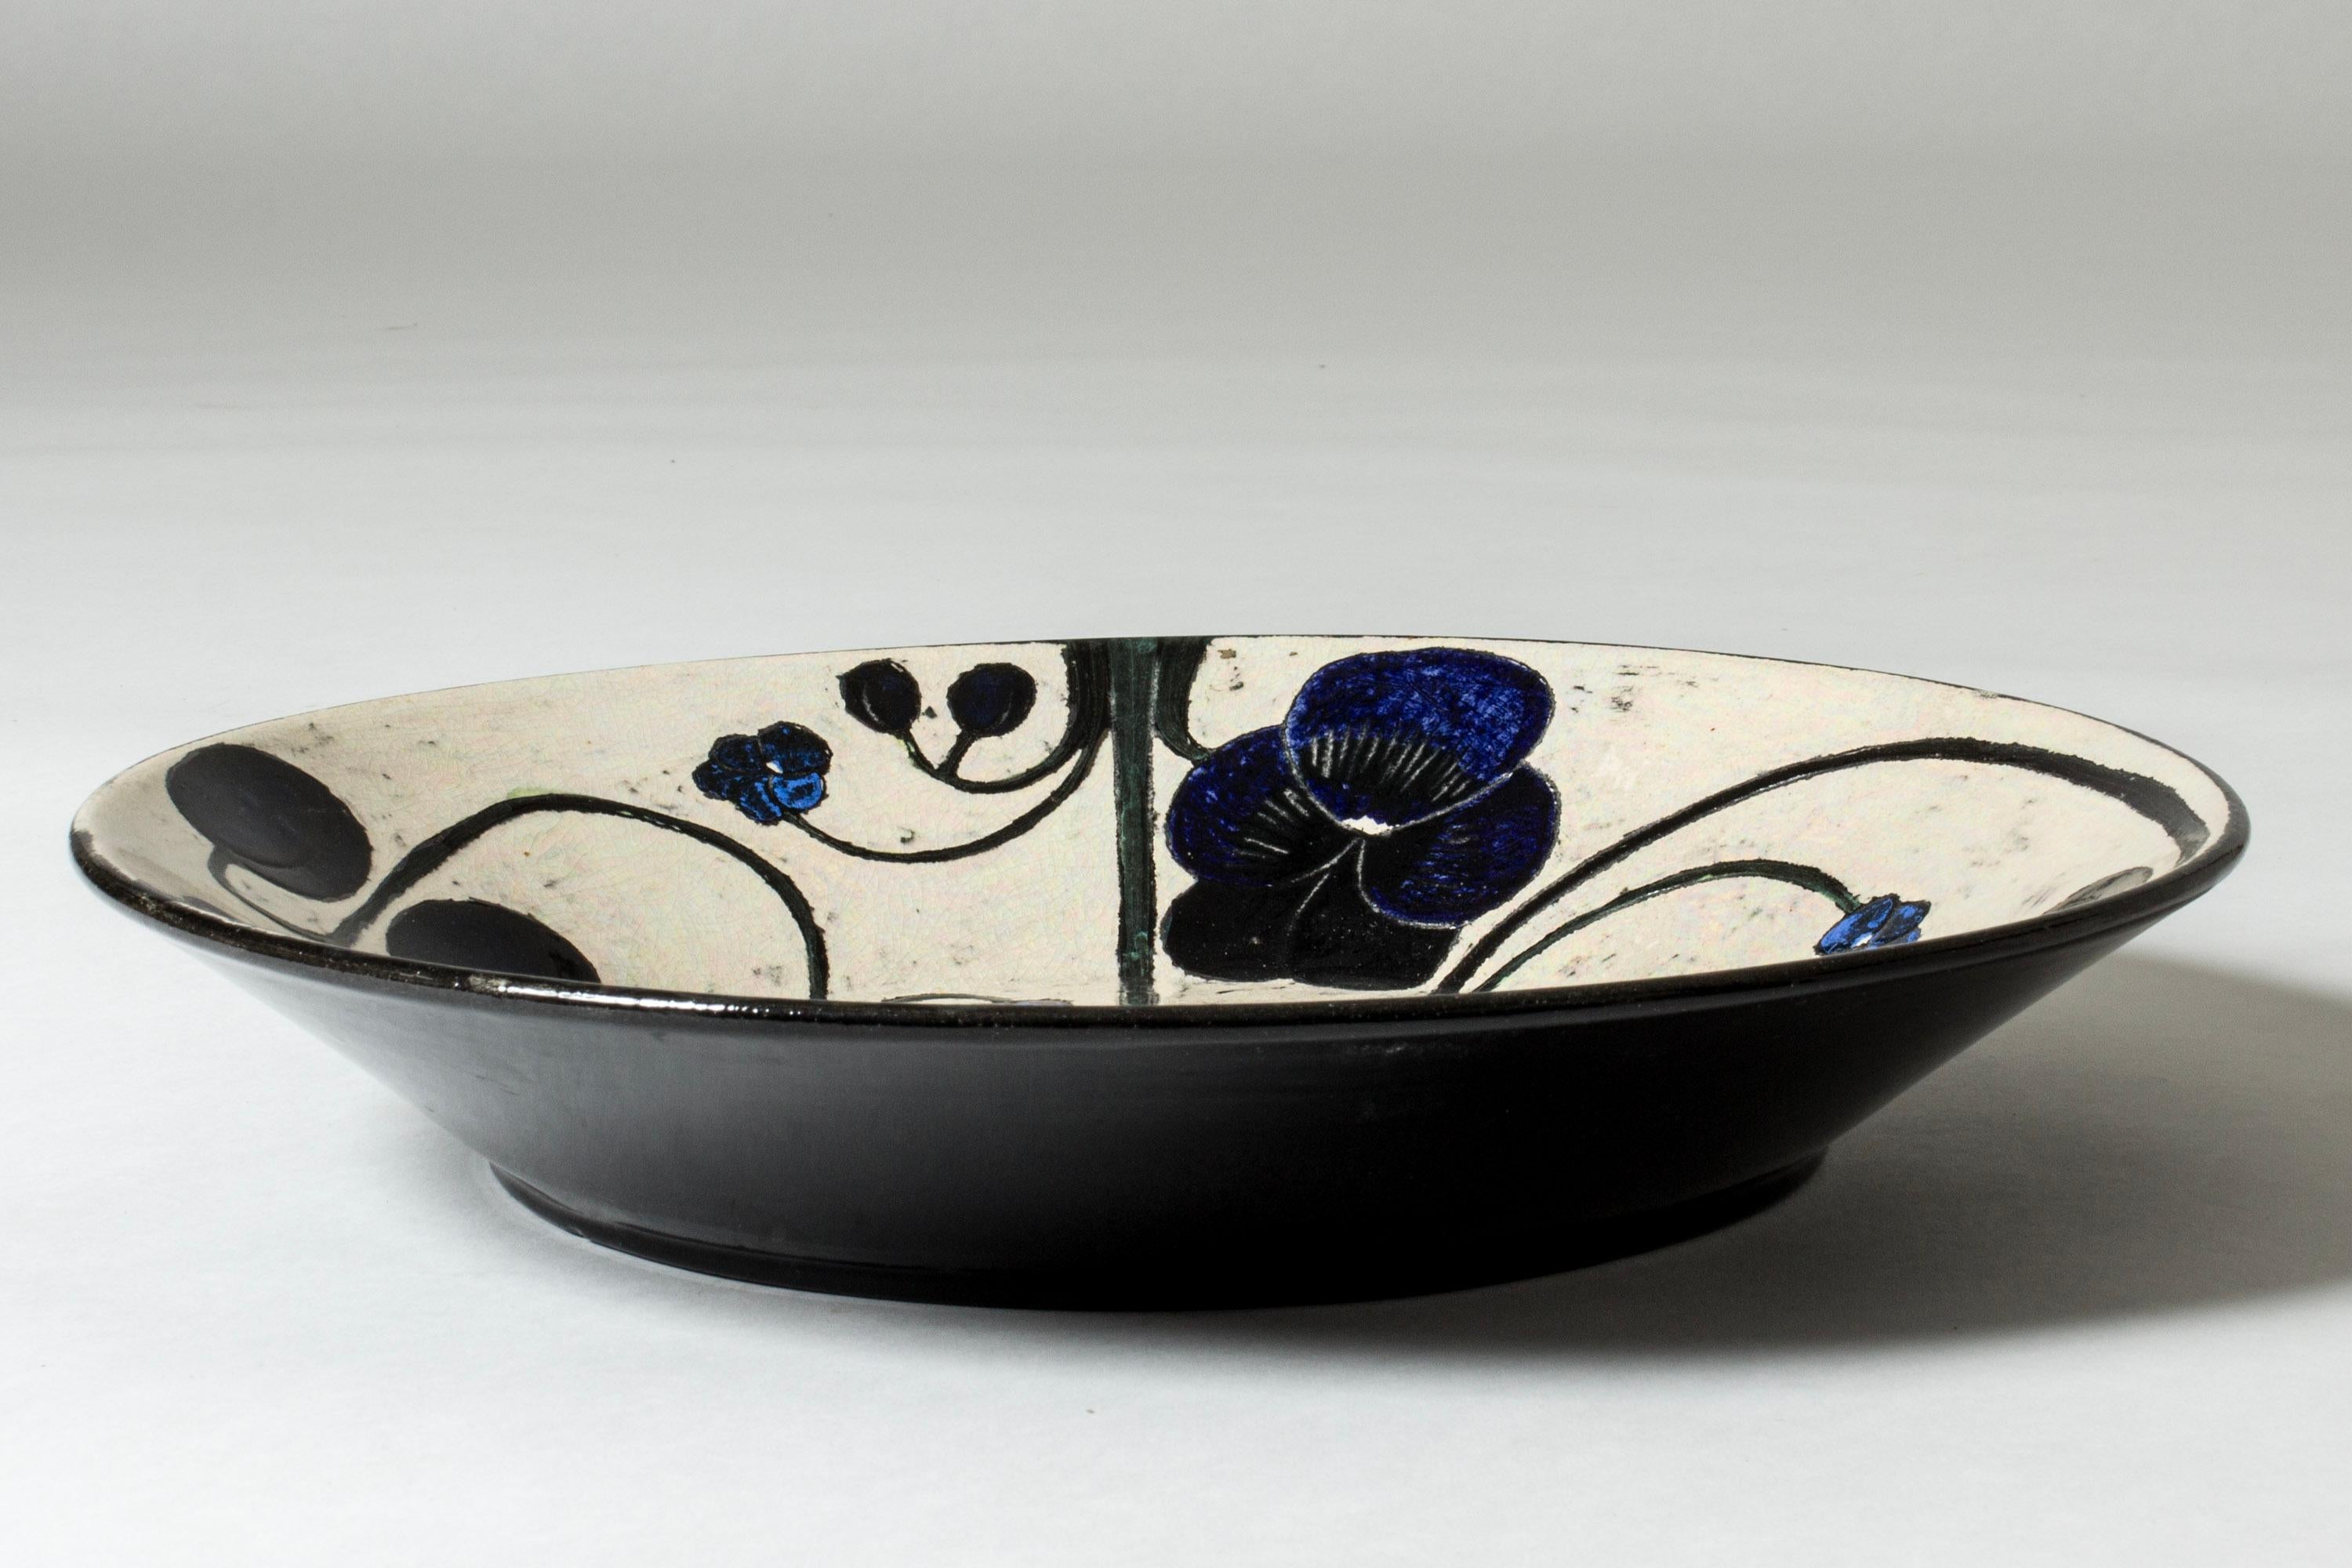 Amazing, unique stoneware platter by Birger Kaipiainen. Beautiful composition on a white background, of a white flower, two silvery pears and violets.

Birger Kaipiainen was Finland’s foremost ceramic artist of the midcentury period, whose unique